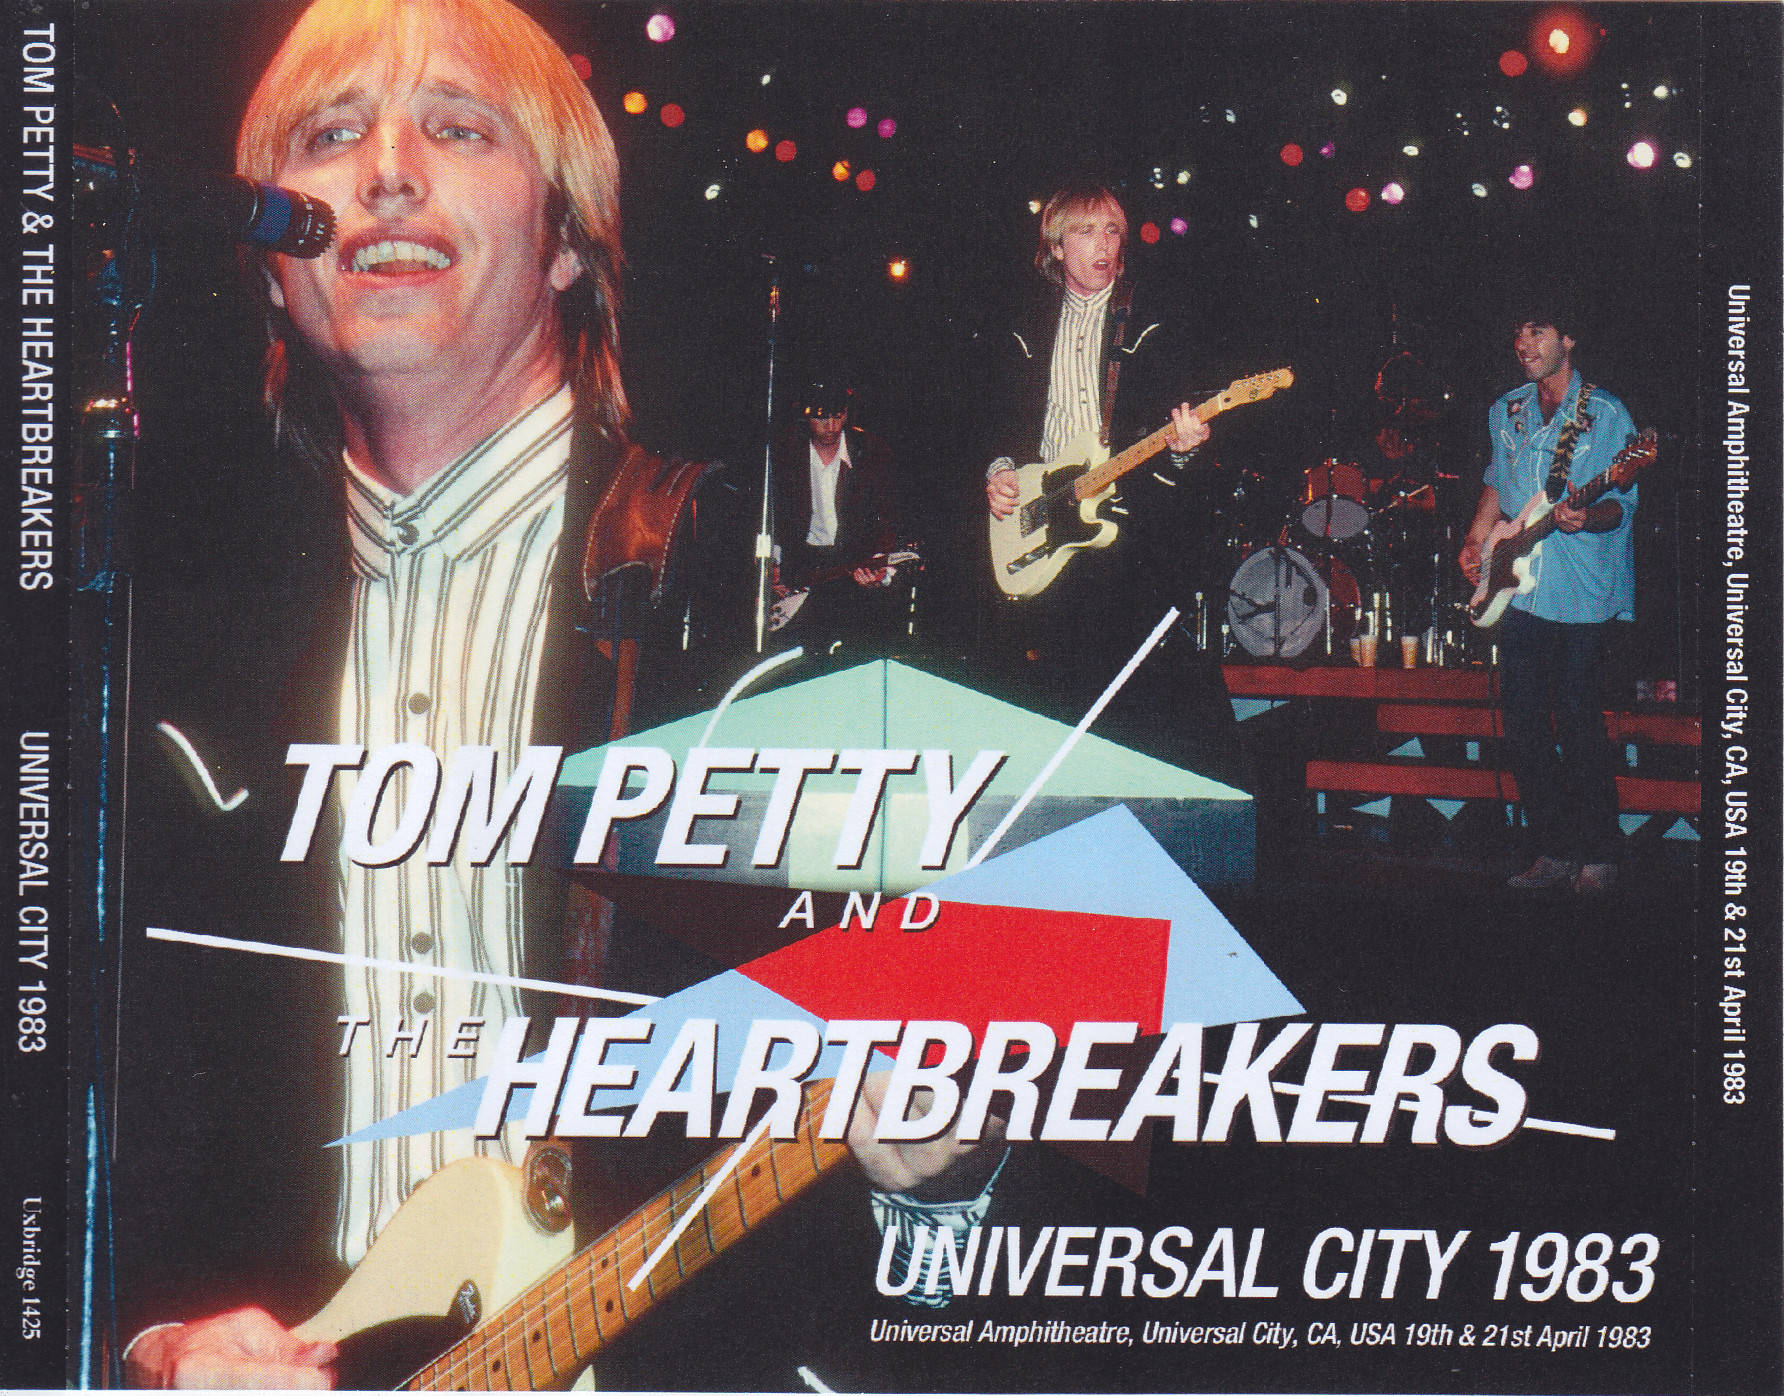 Tom Petty And The Heartbreakers Universal City 1983 Poster Wallpaper